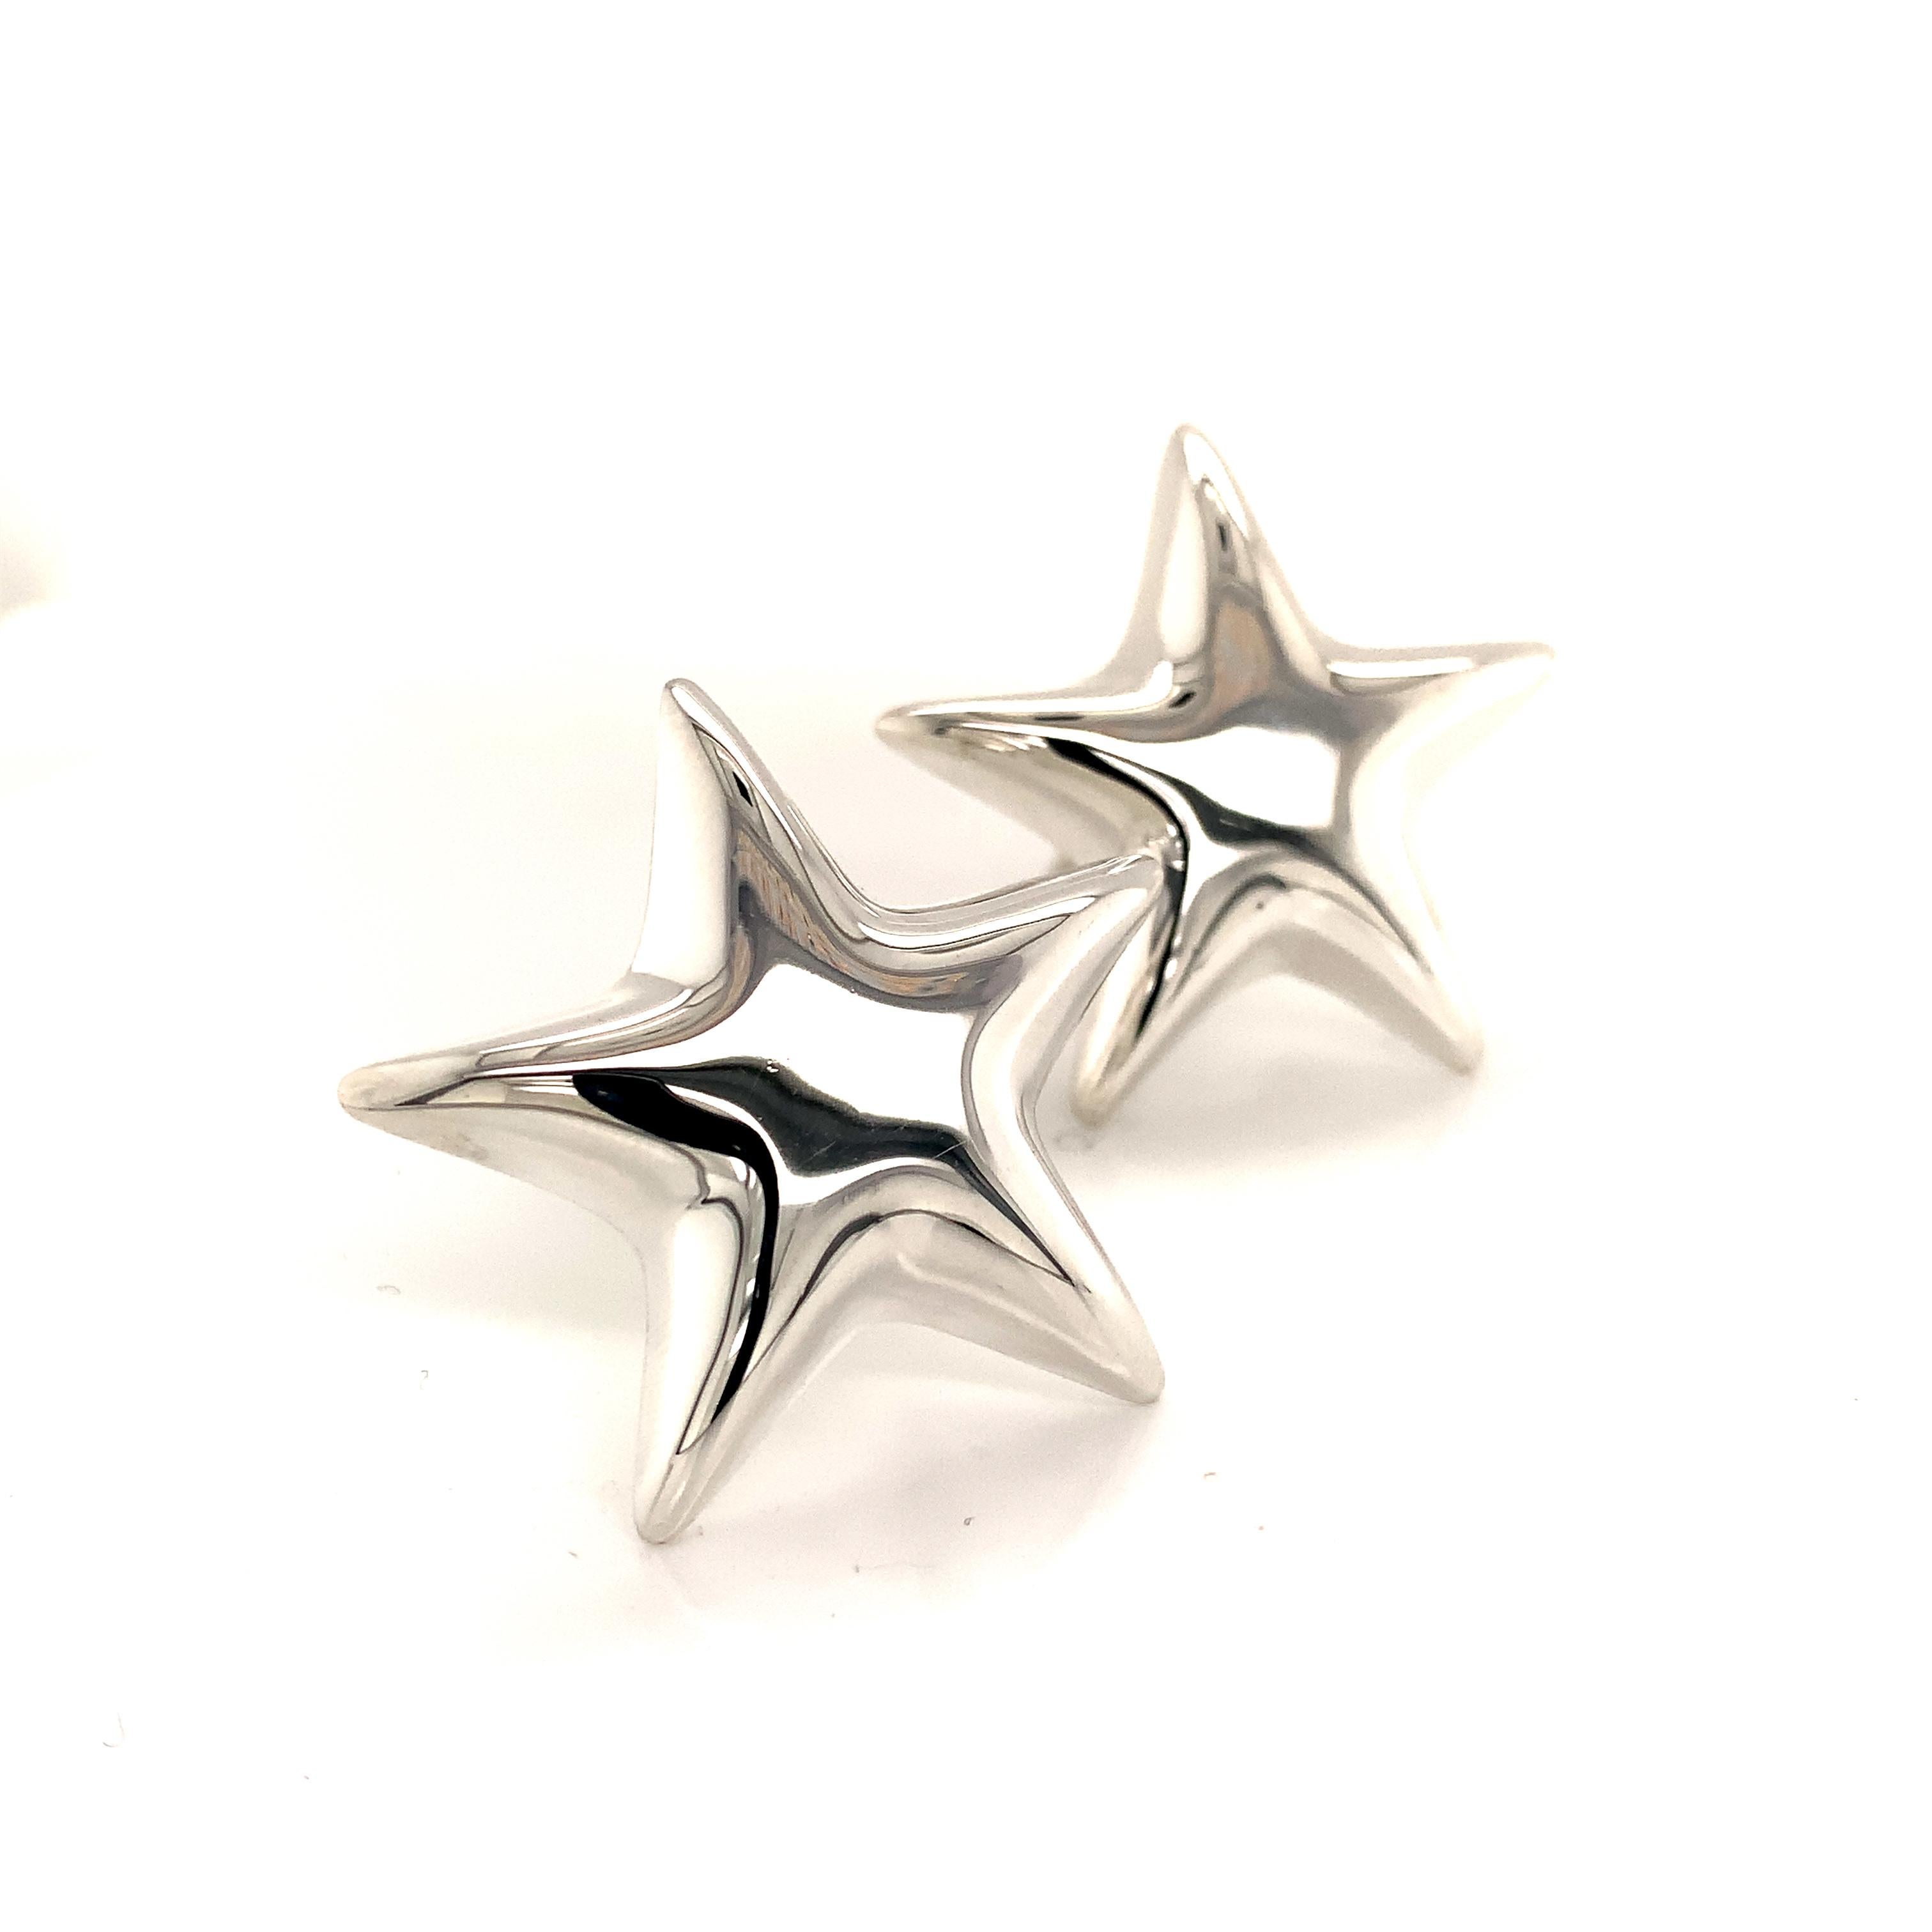 Tiffany & Co Estate Omega Back Star Earrings Sterling Silver 18.9 Grams TIF92

(No Piercing)
 
These elegant Authentic Tiffany & Co. star earrings have a weight of 18.9 Grams.

TRUSTED SELLER SINCE 2002
 
PLEASE SEE OUR HUNDREDS OF POSITIVE